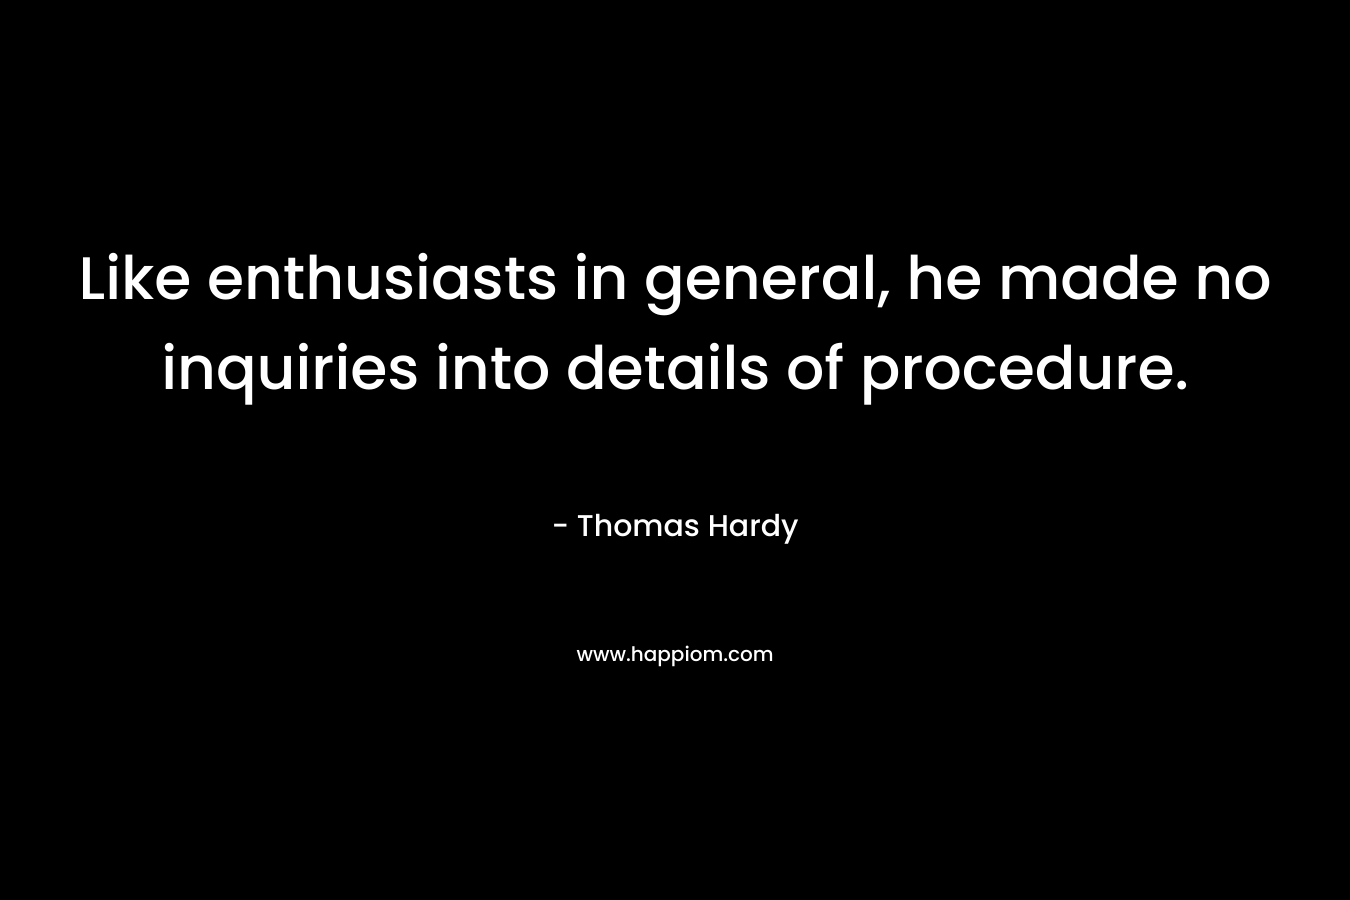 Like enthusiasts in general, he made no inquiries into details of procedure. – Thomas Hardy